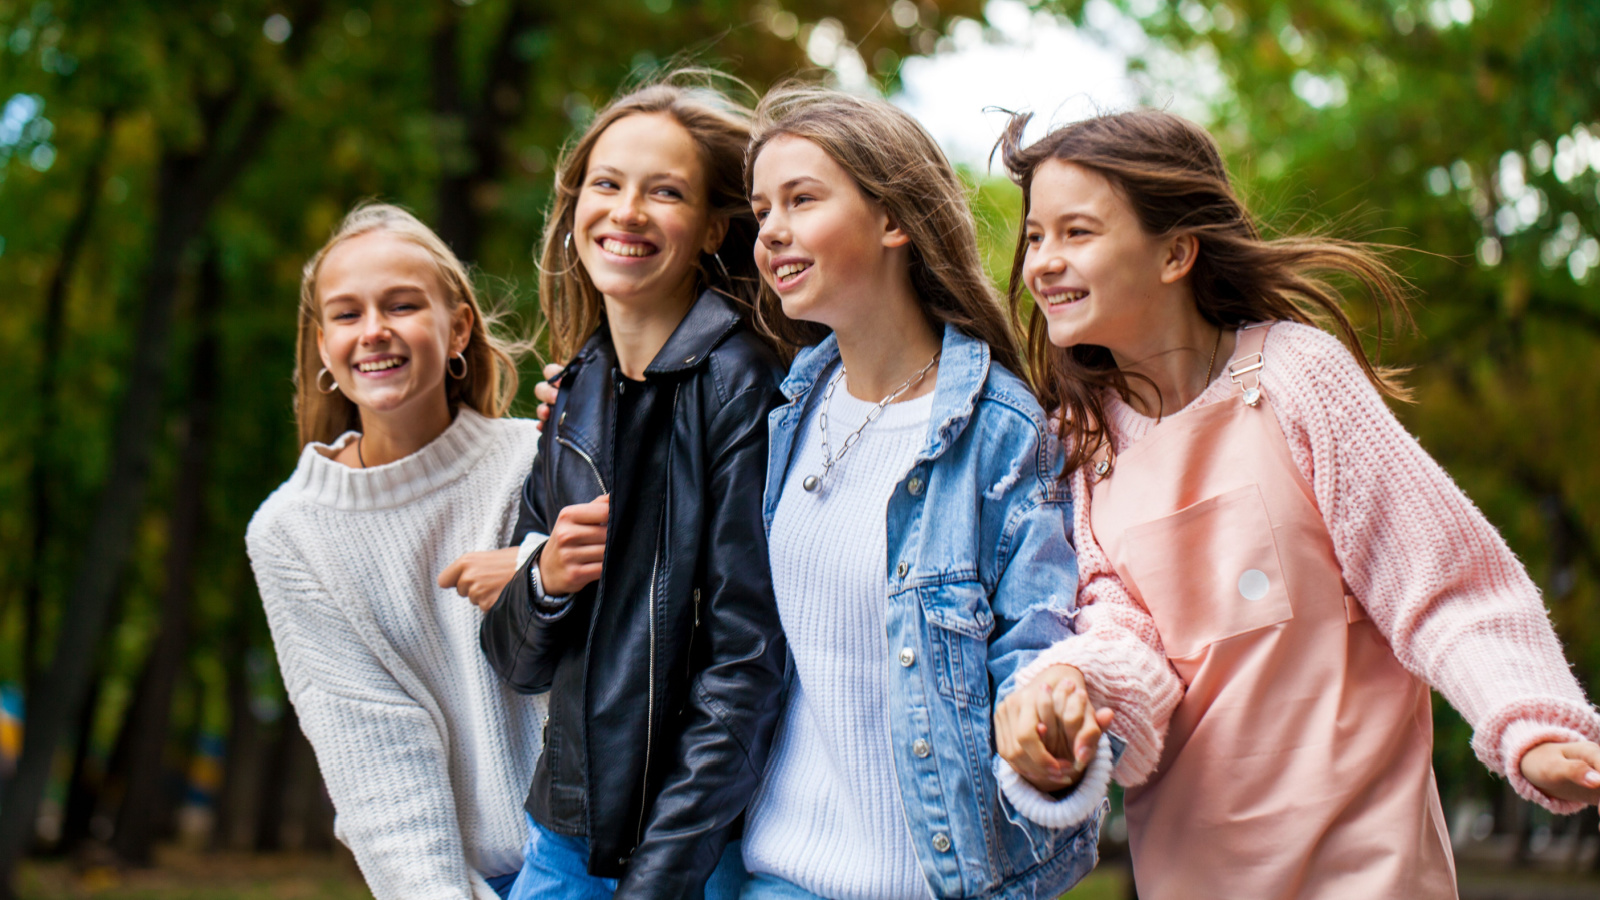 image credit: Andrey Arkusha/Shutterstock <p><span>Peer influence and popular culture play a significant role in shaping the interests and attitudes of young people. If their friends do not attend religious ceremonies or if popular culture portrays religion negatively, they are likely to be influenced by these perspectives. The desire to fit in with their peer group can override their interest in participating in religious activities.</span></p>